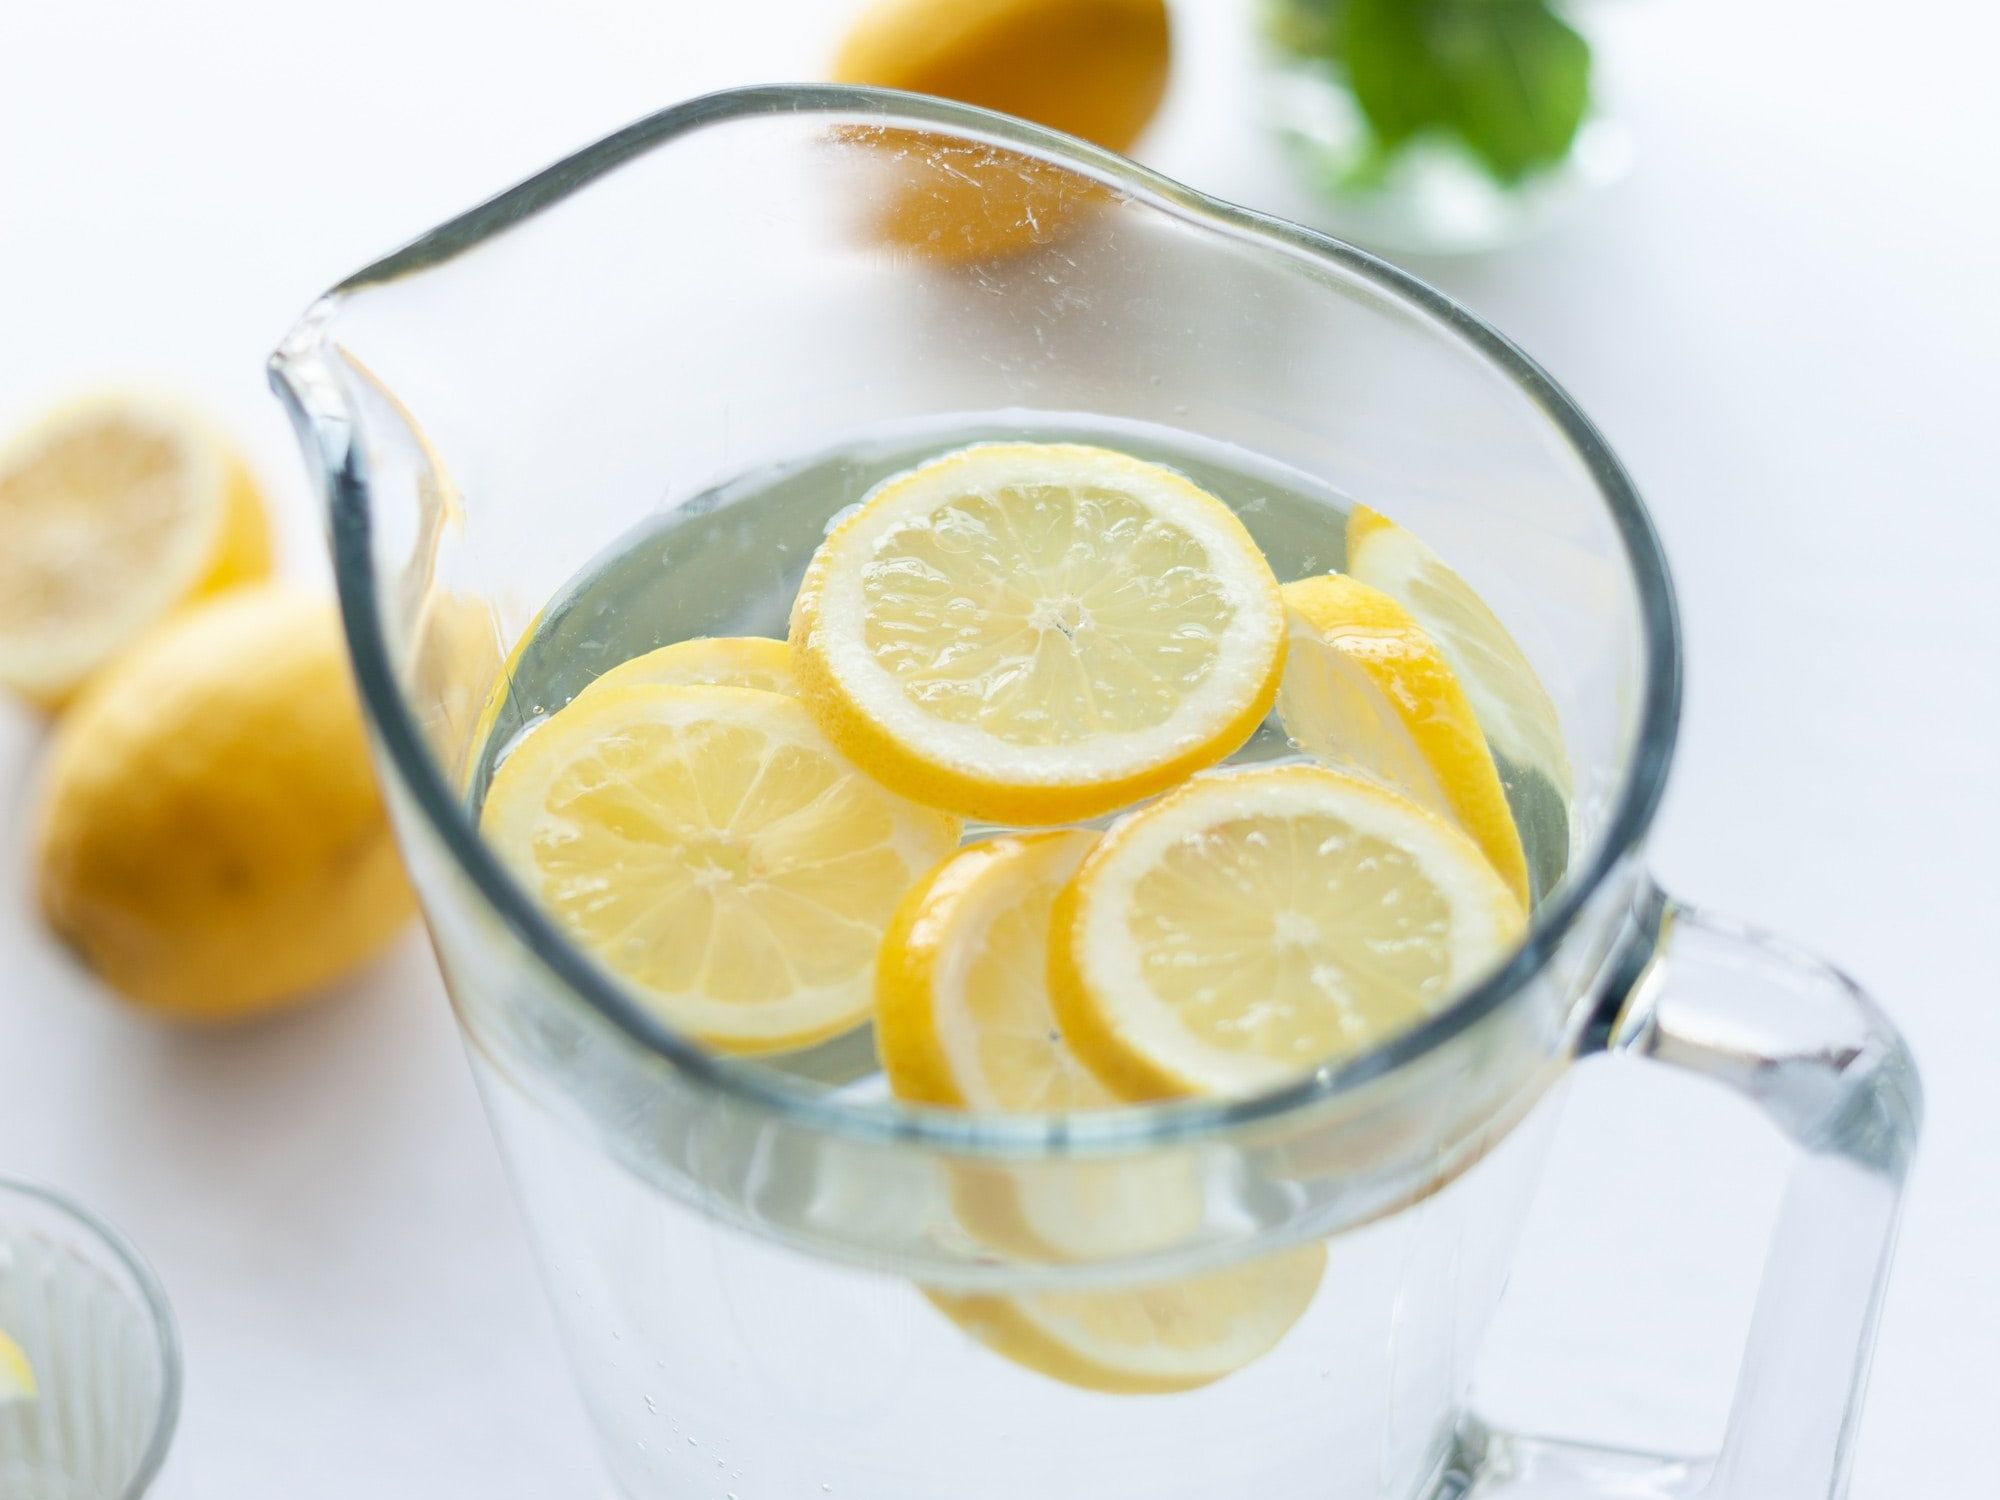 slices of lemons in clear pitcher filled with water